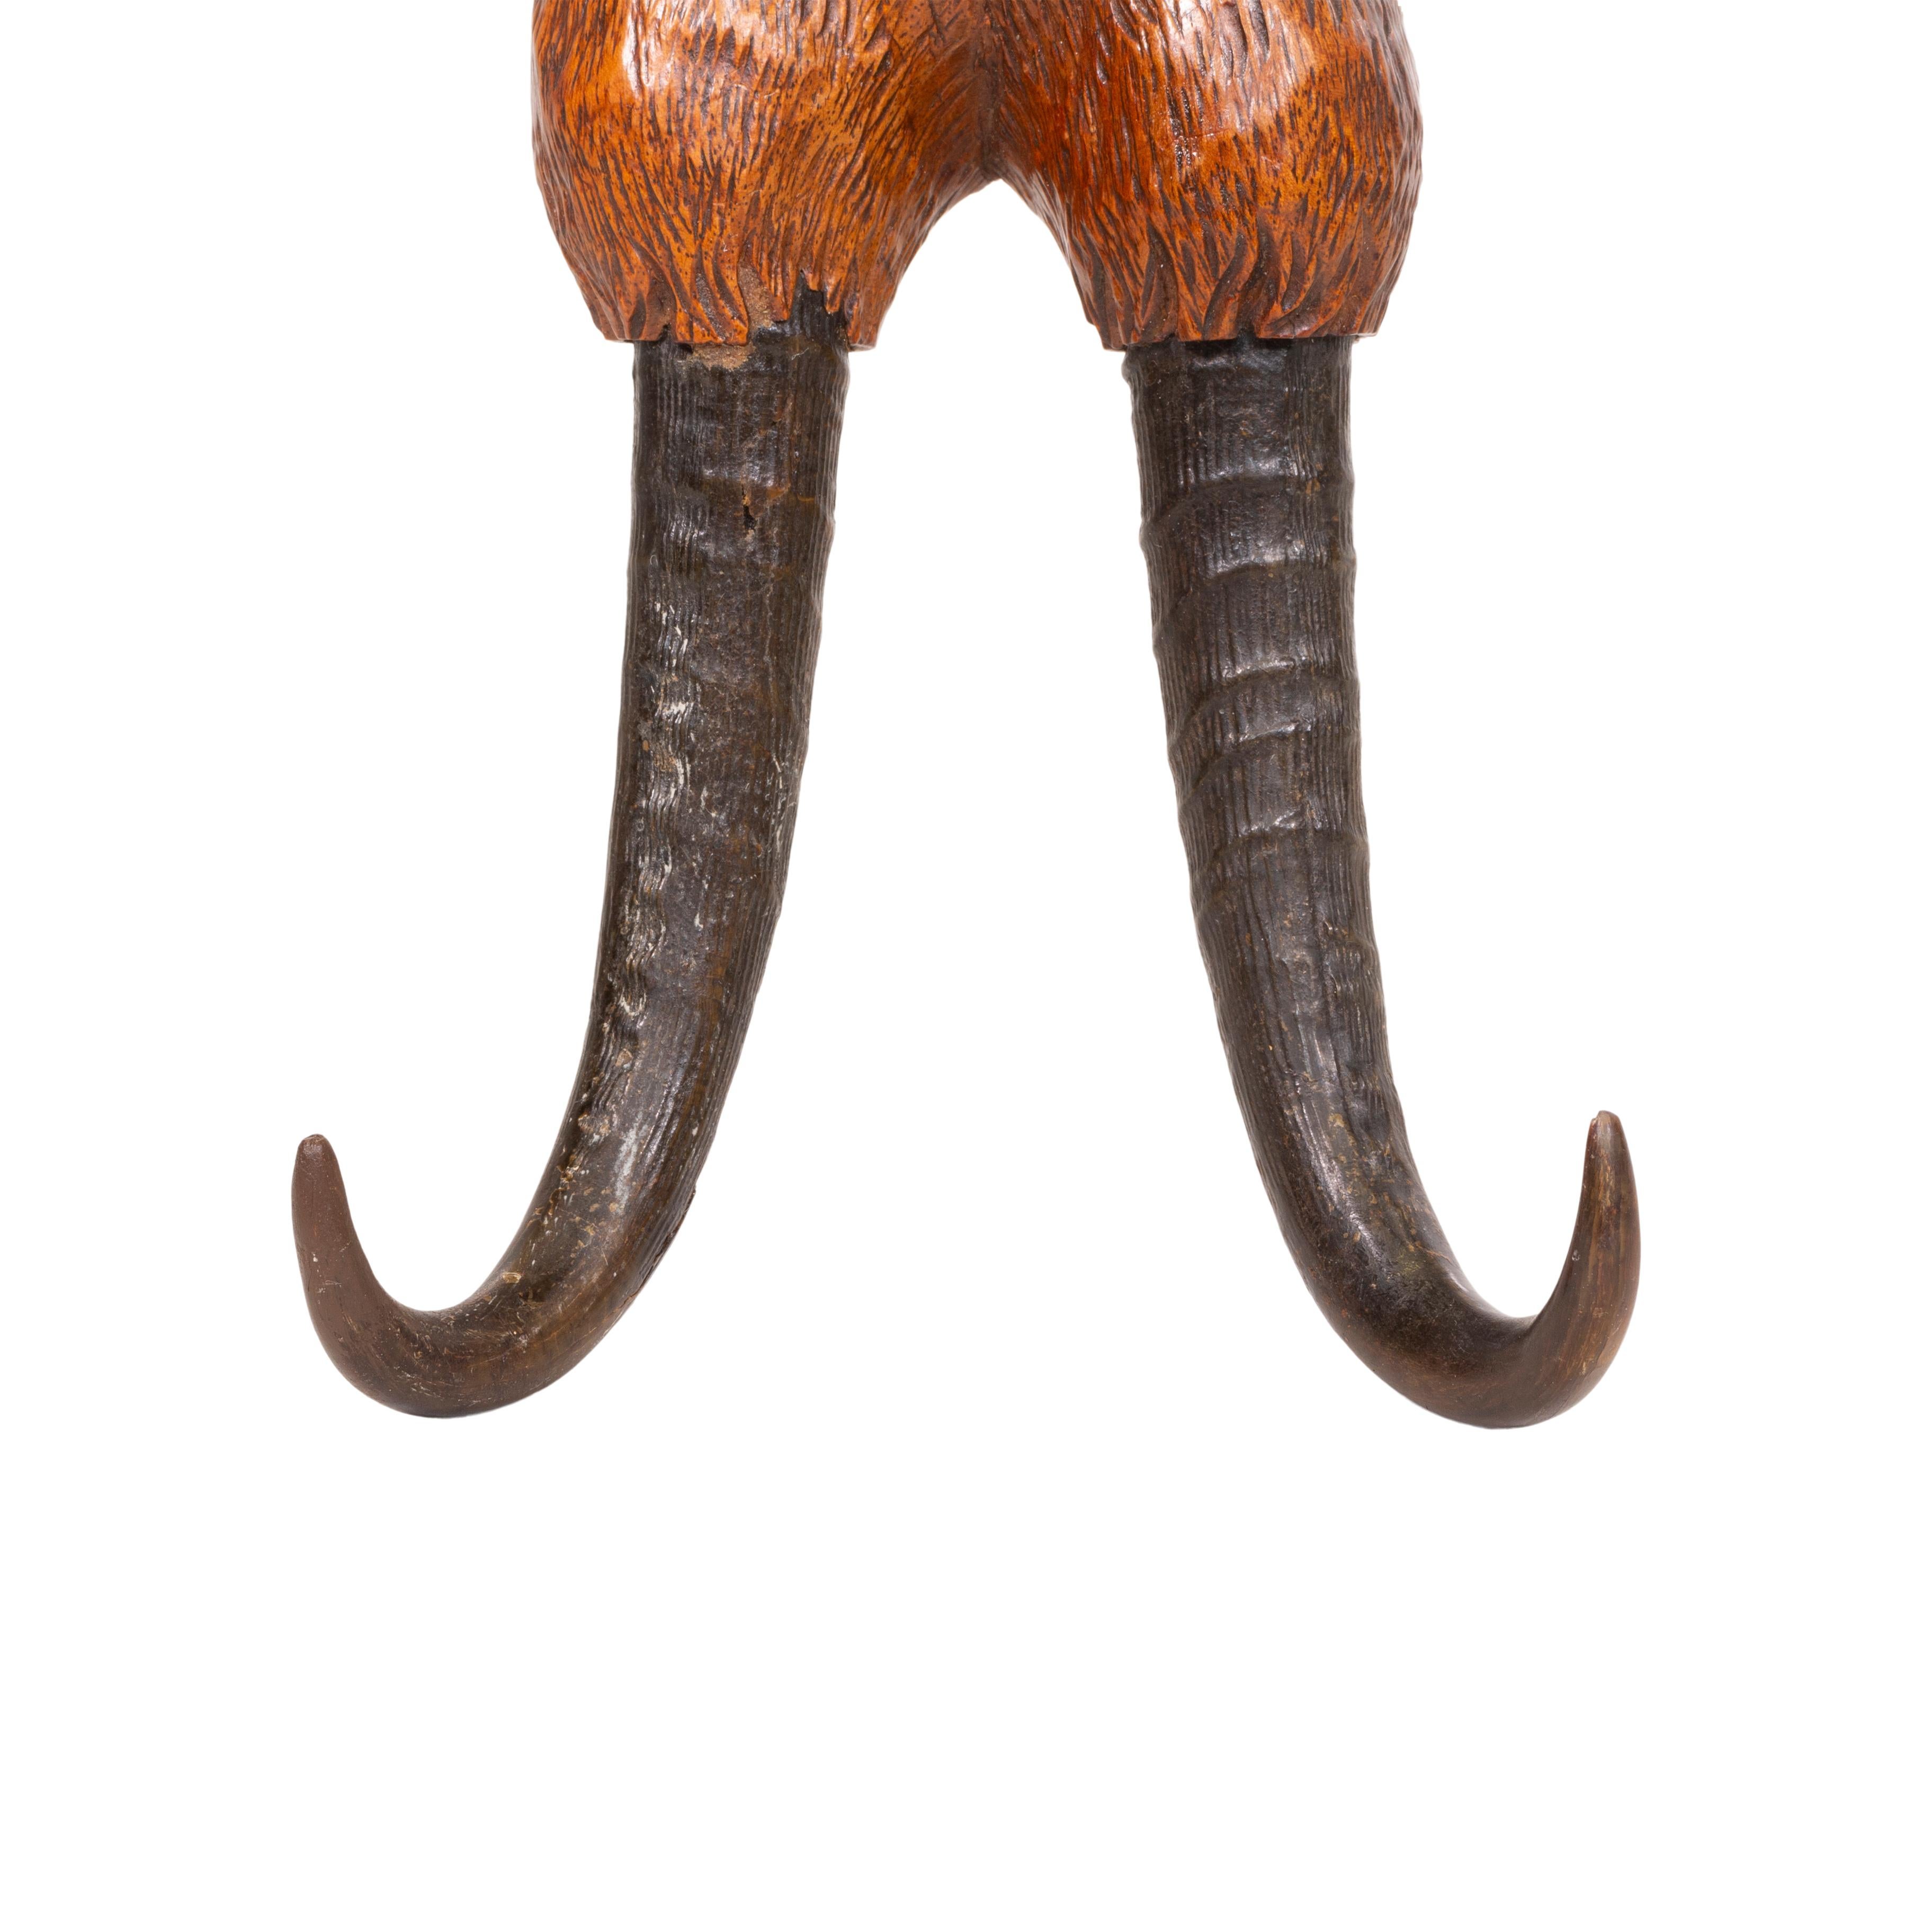 Black Forest Carved Leash Holder/Hook, circa 1900 In Good Condition For Sale In Coeur d'Alene, ID